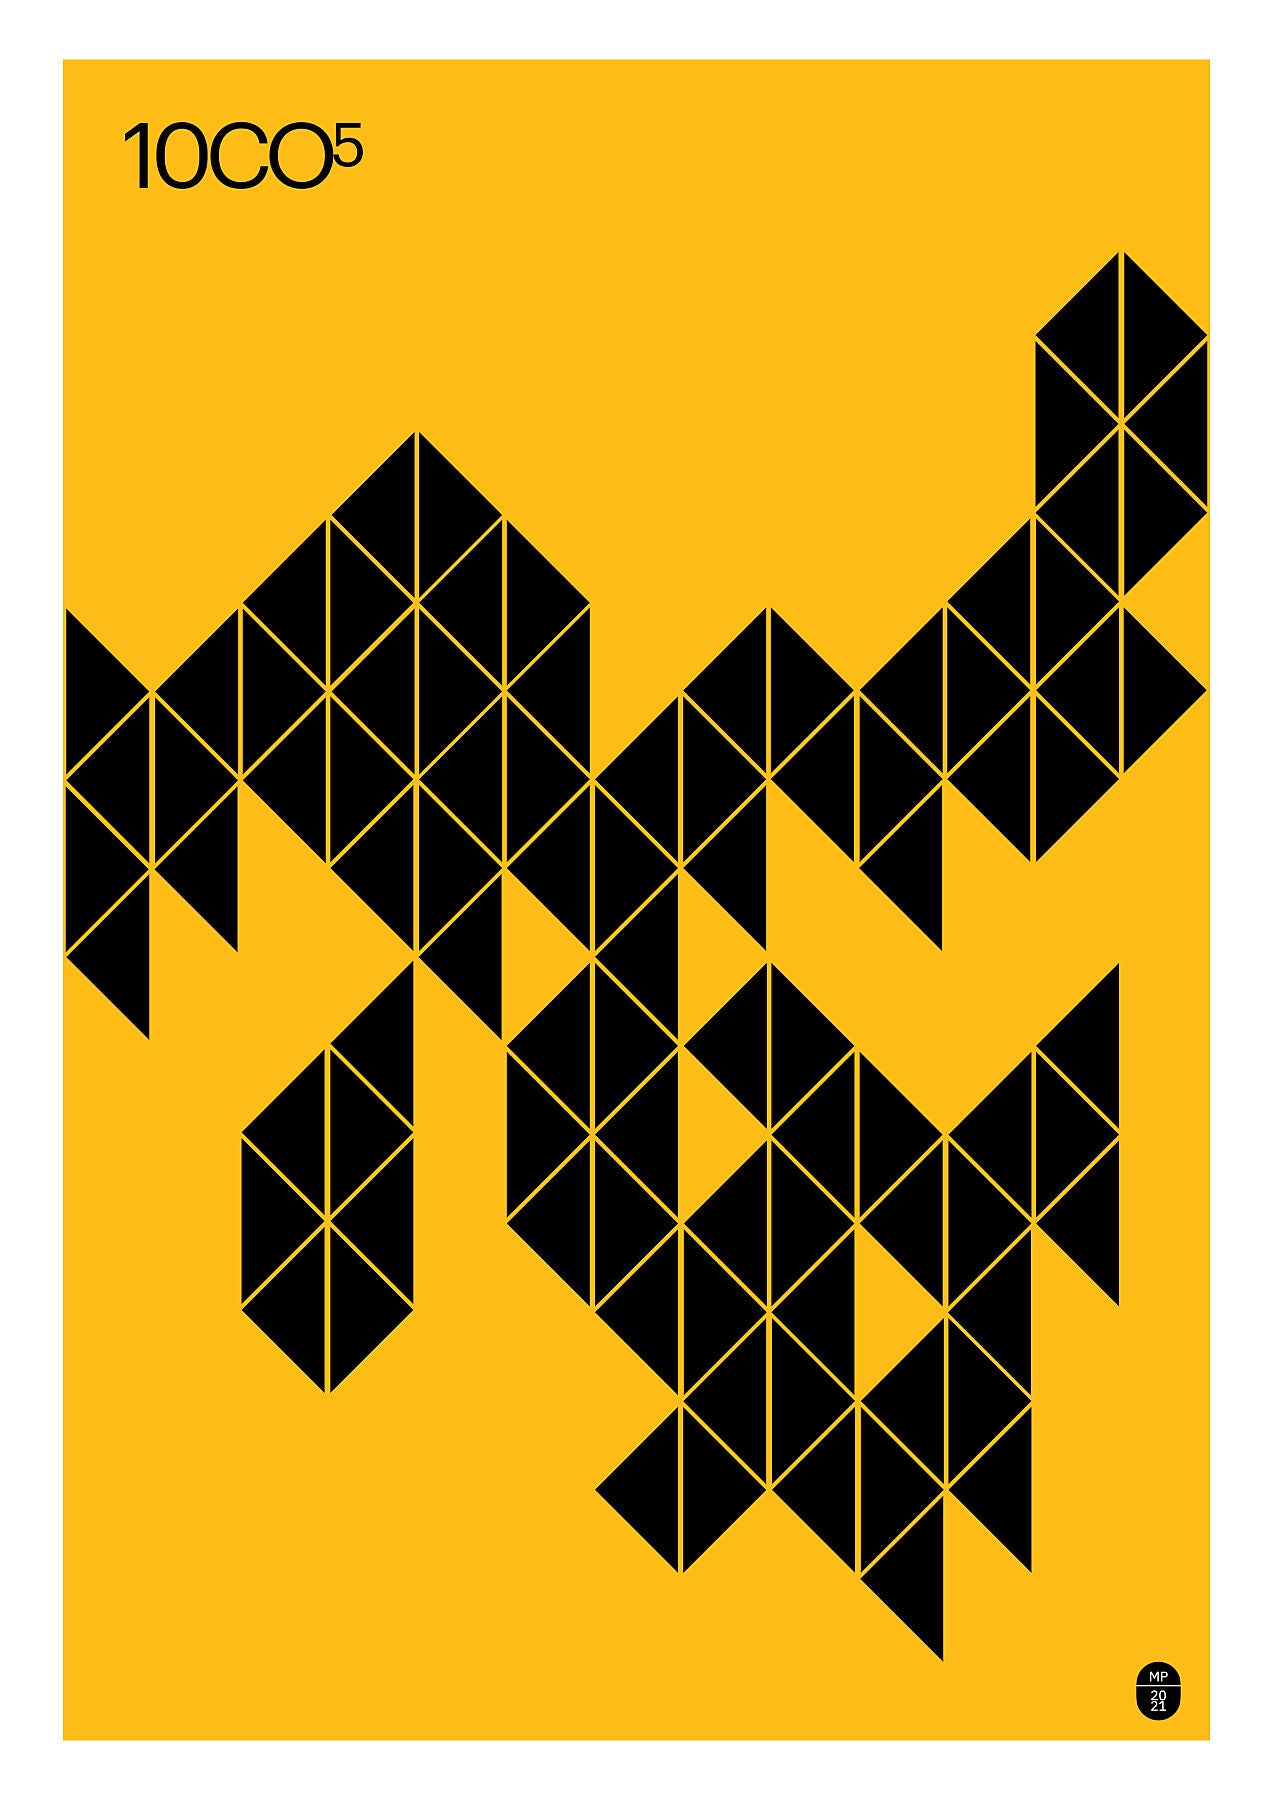 Yellow poster with a geometric composition of triangles, available in C-Type print on Fuji Matt Crystal archive paper with a semi-matt finish. - Starting from 19 € / Shipped Worldwide